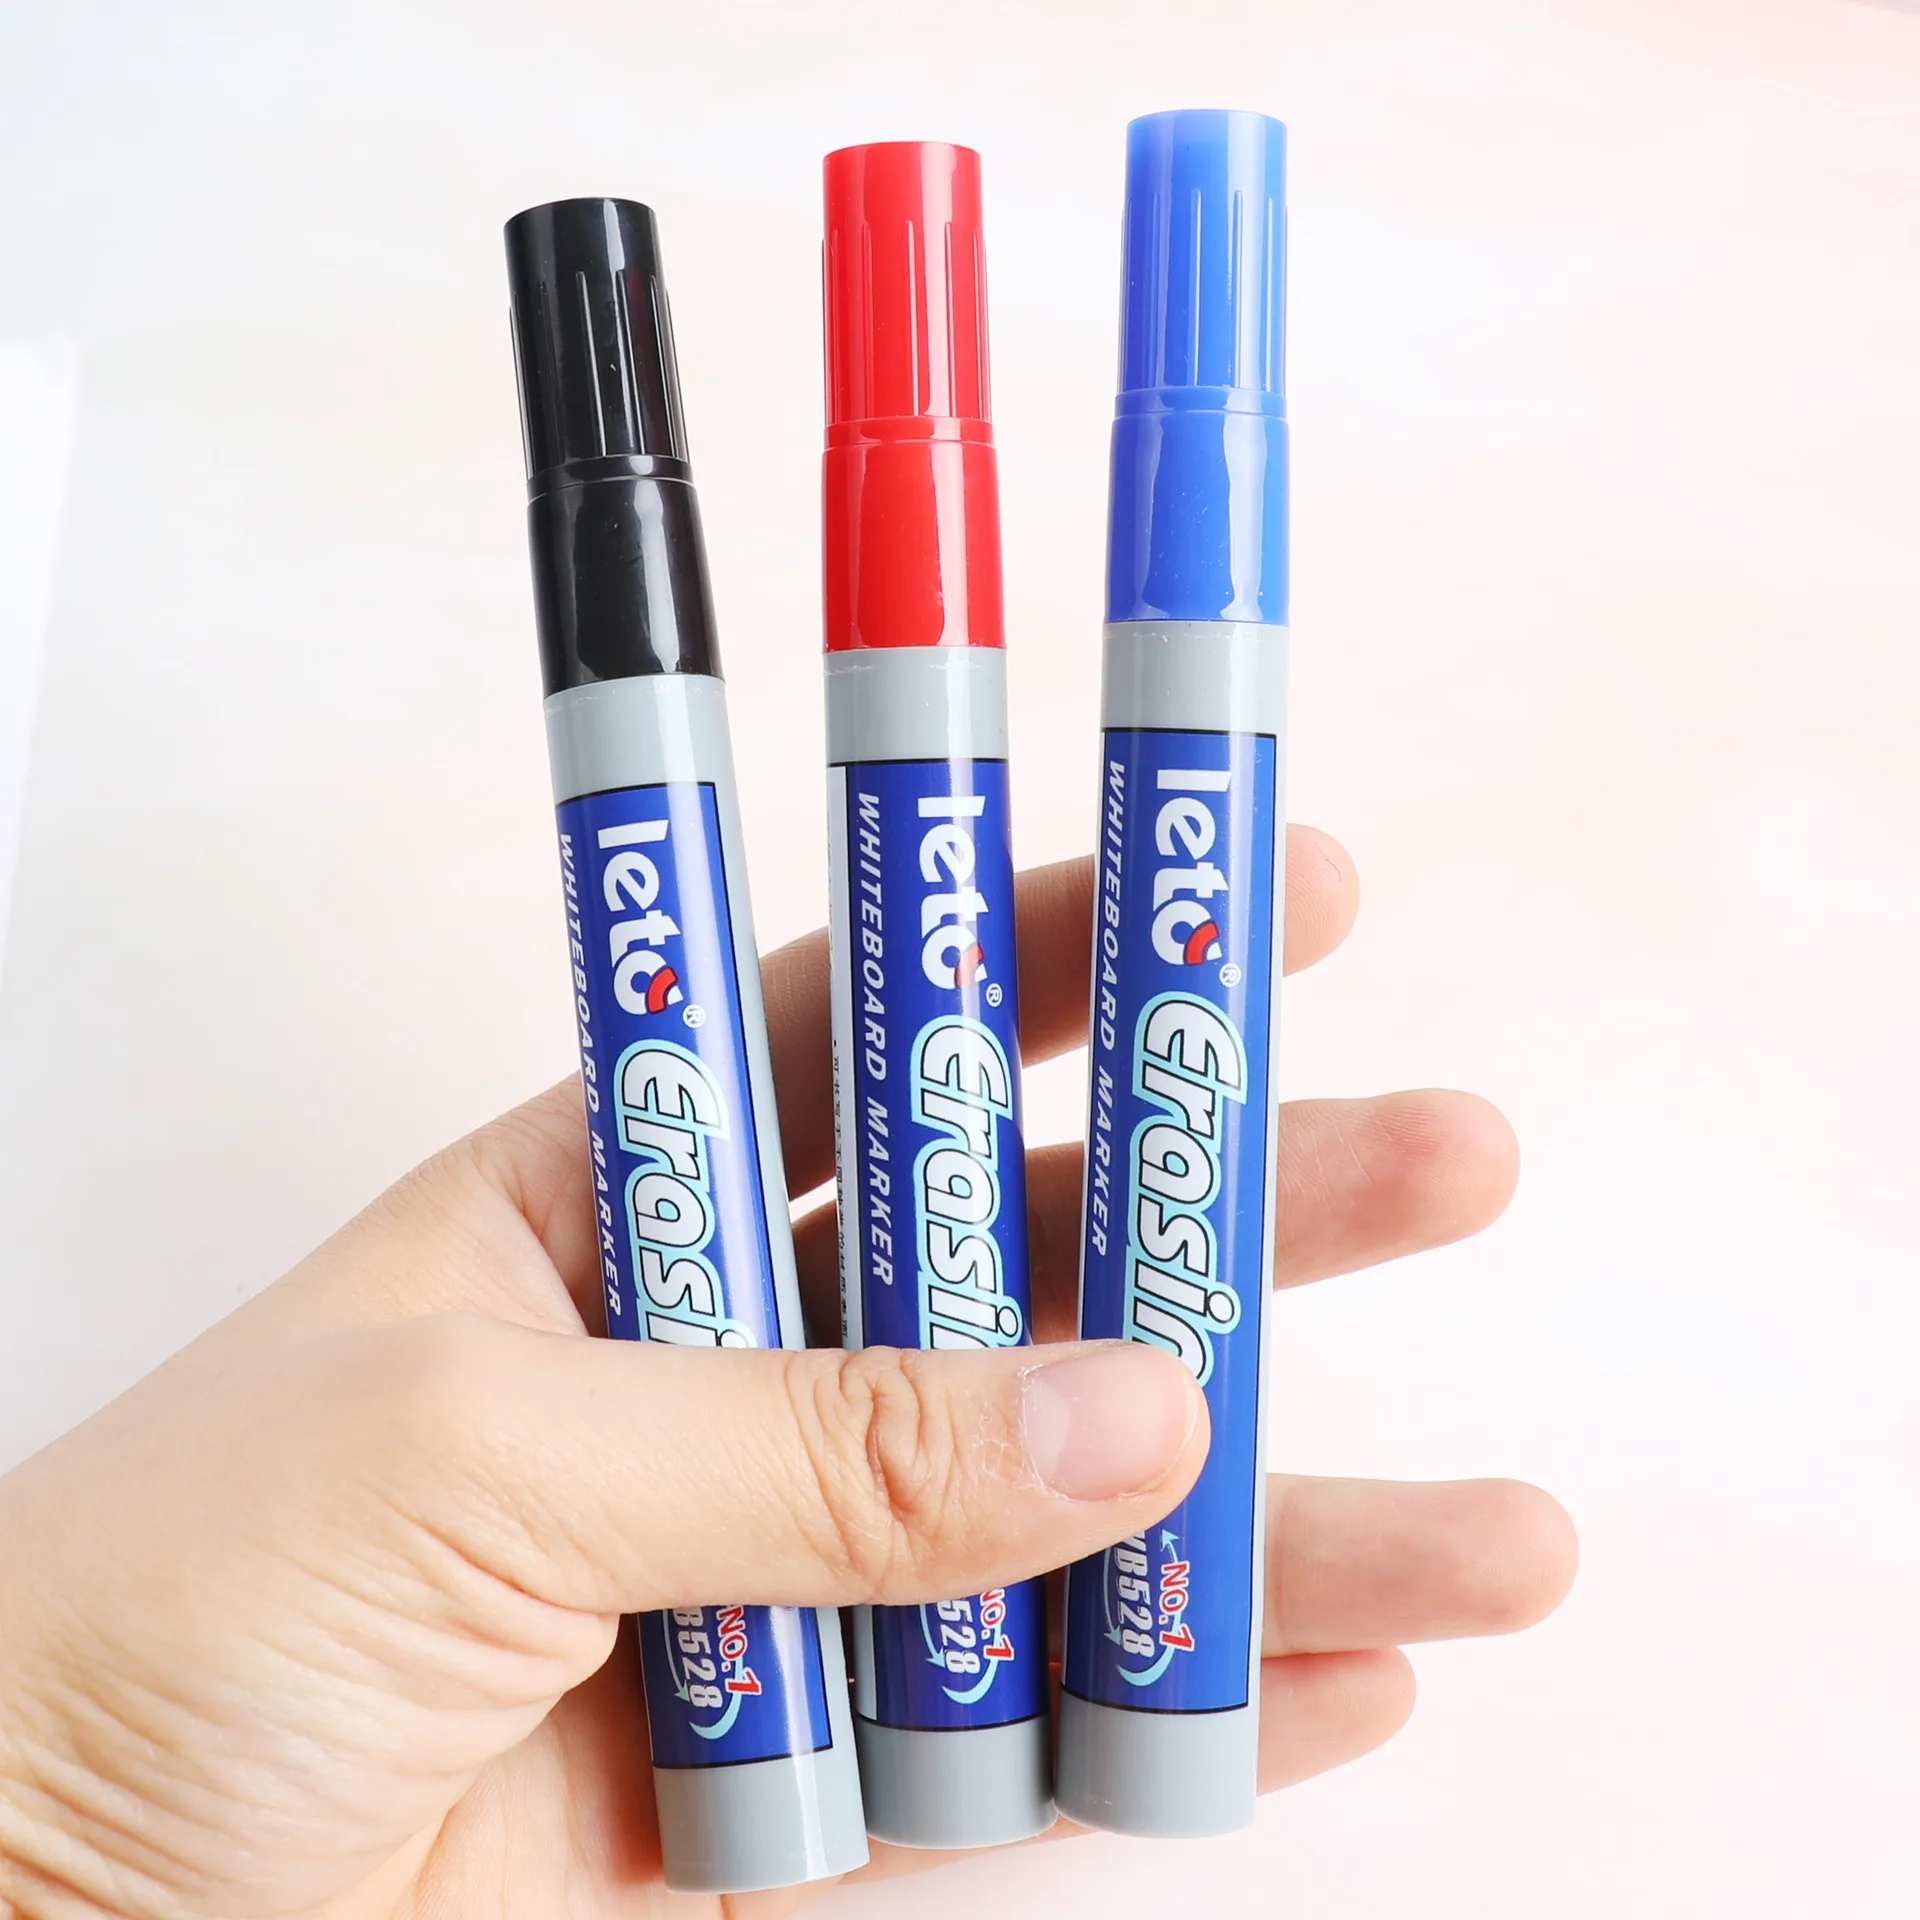 

Dry Erase Markers Whiteboard Markers With Erase Fine Point Dry Erase Markers Perfect For Writing School Office On Whiteboards